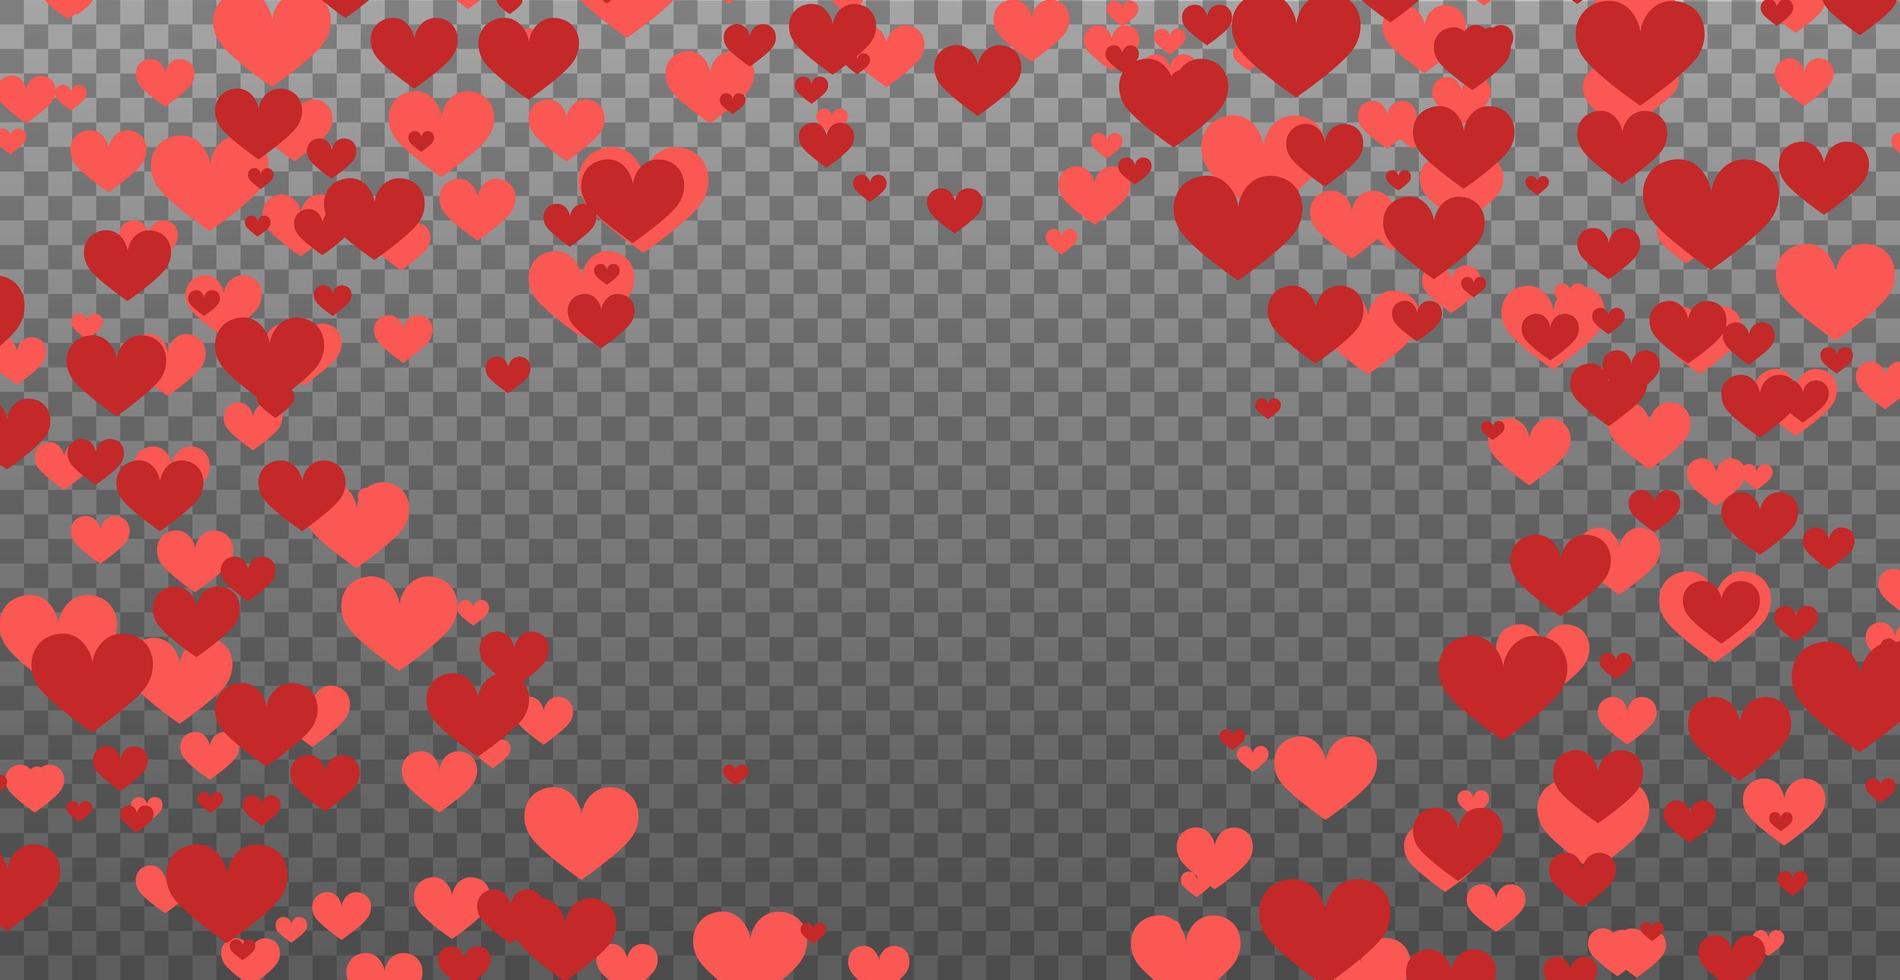 Red hearts on transparent background web template vector